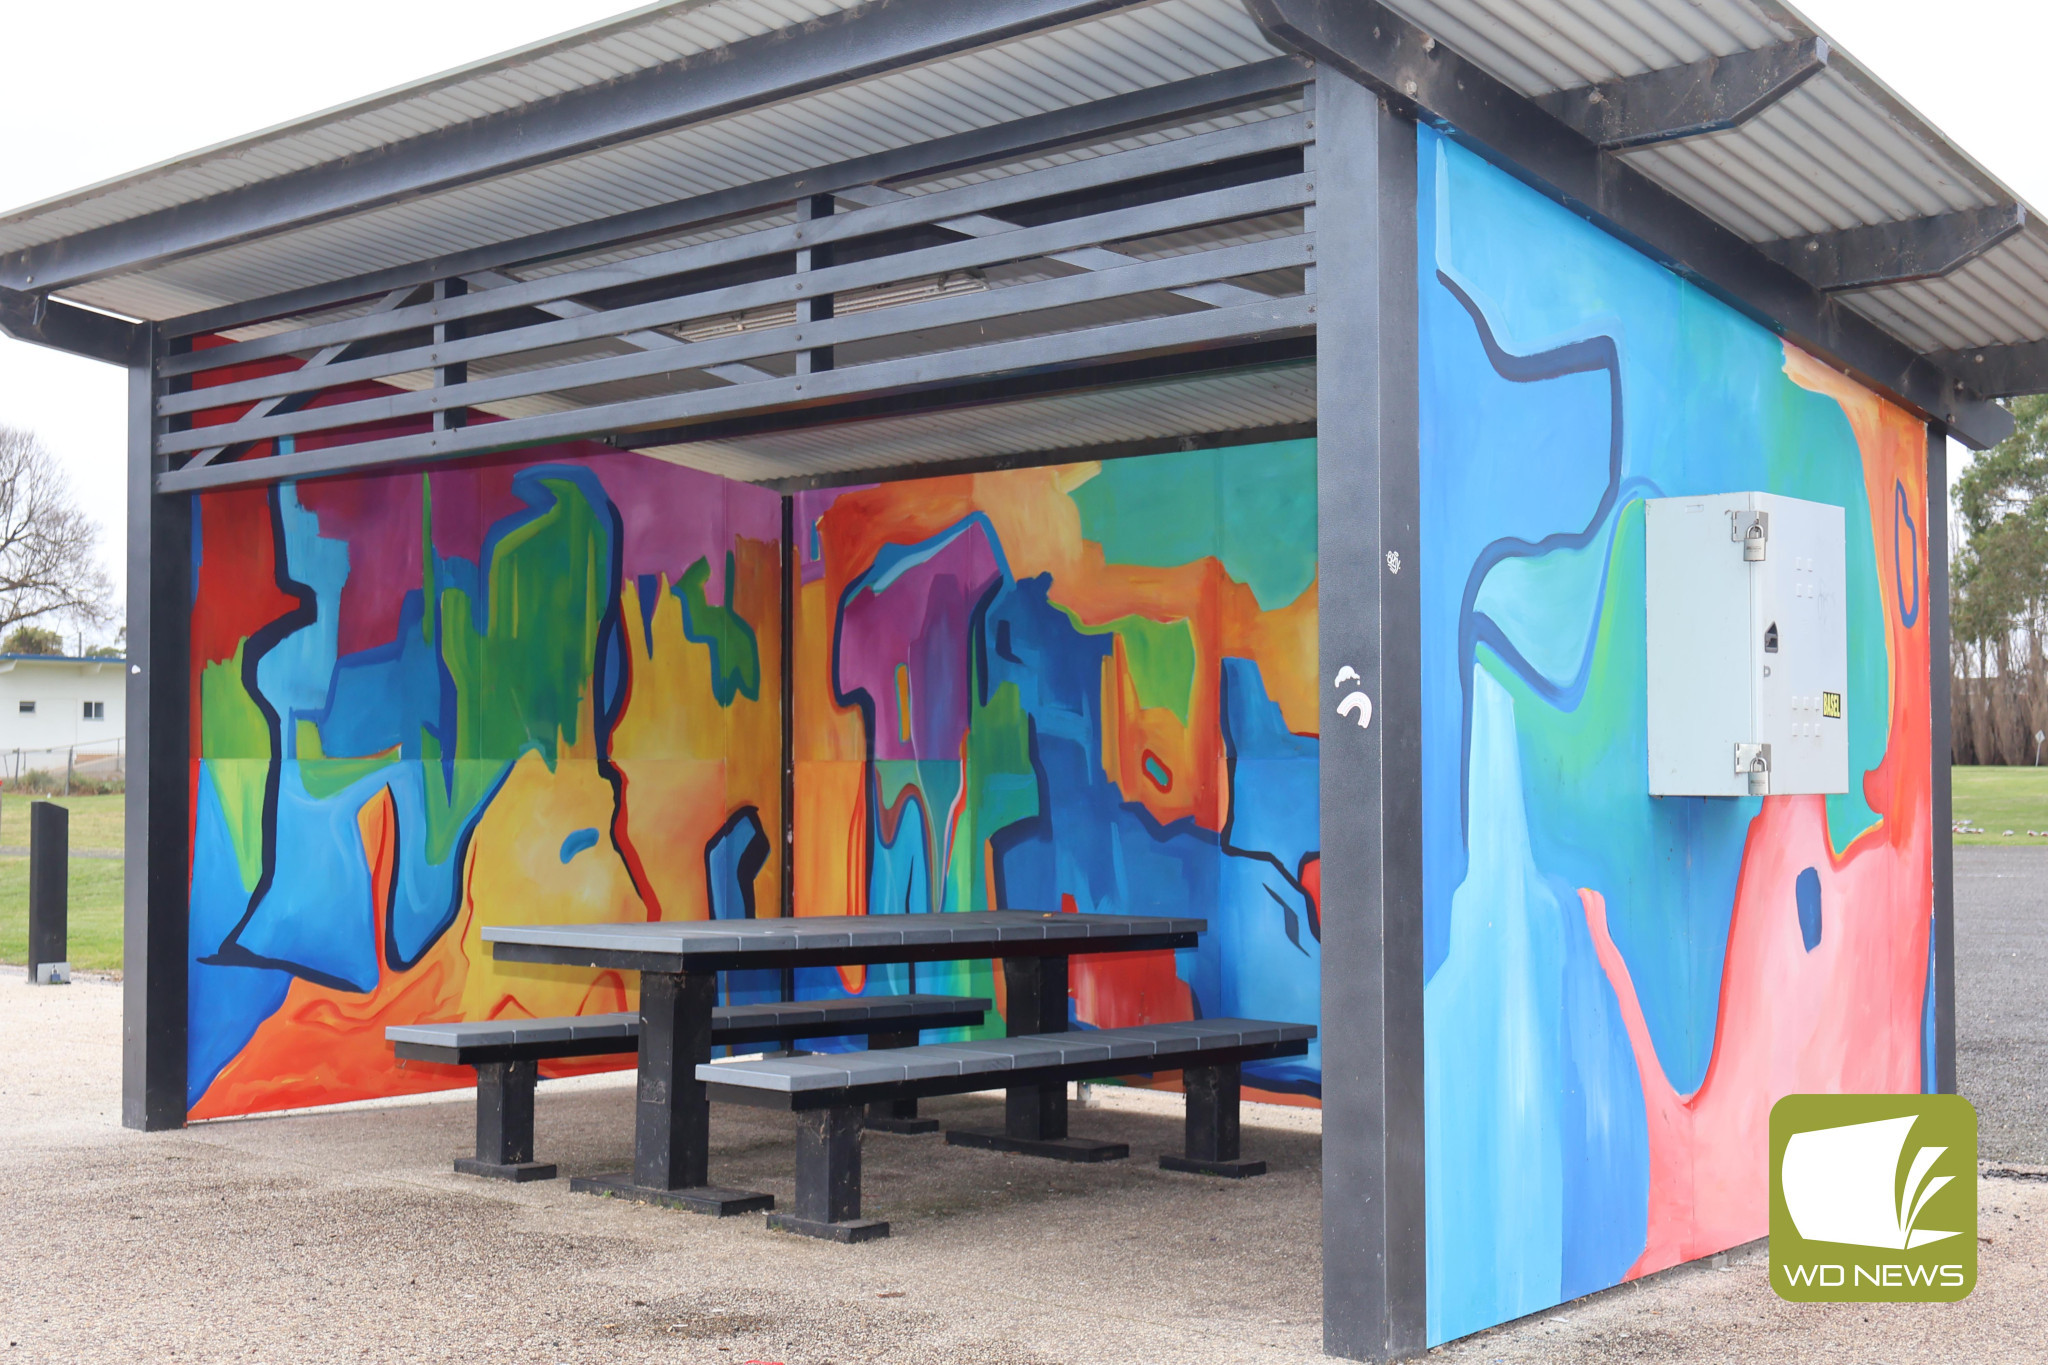 Brand new: A mural painted by a local artist at the Mortlake Skate Park has been repainted after it was vandalised earlier this year.